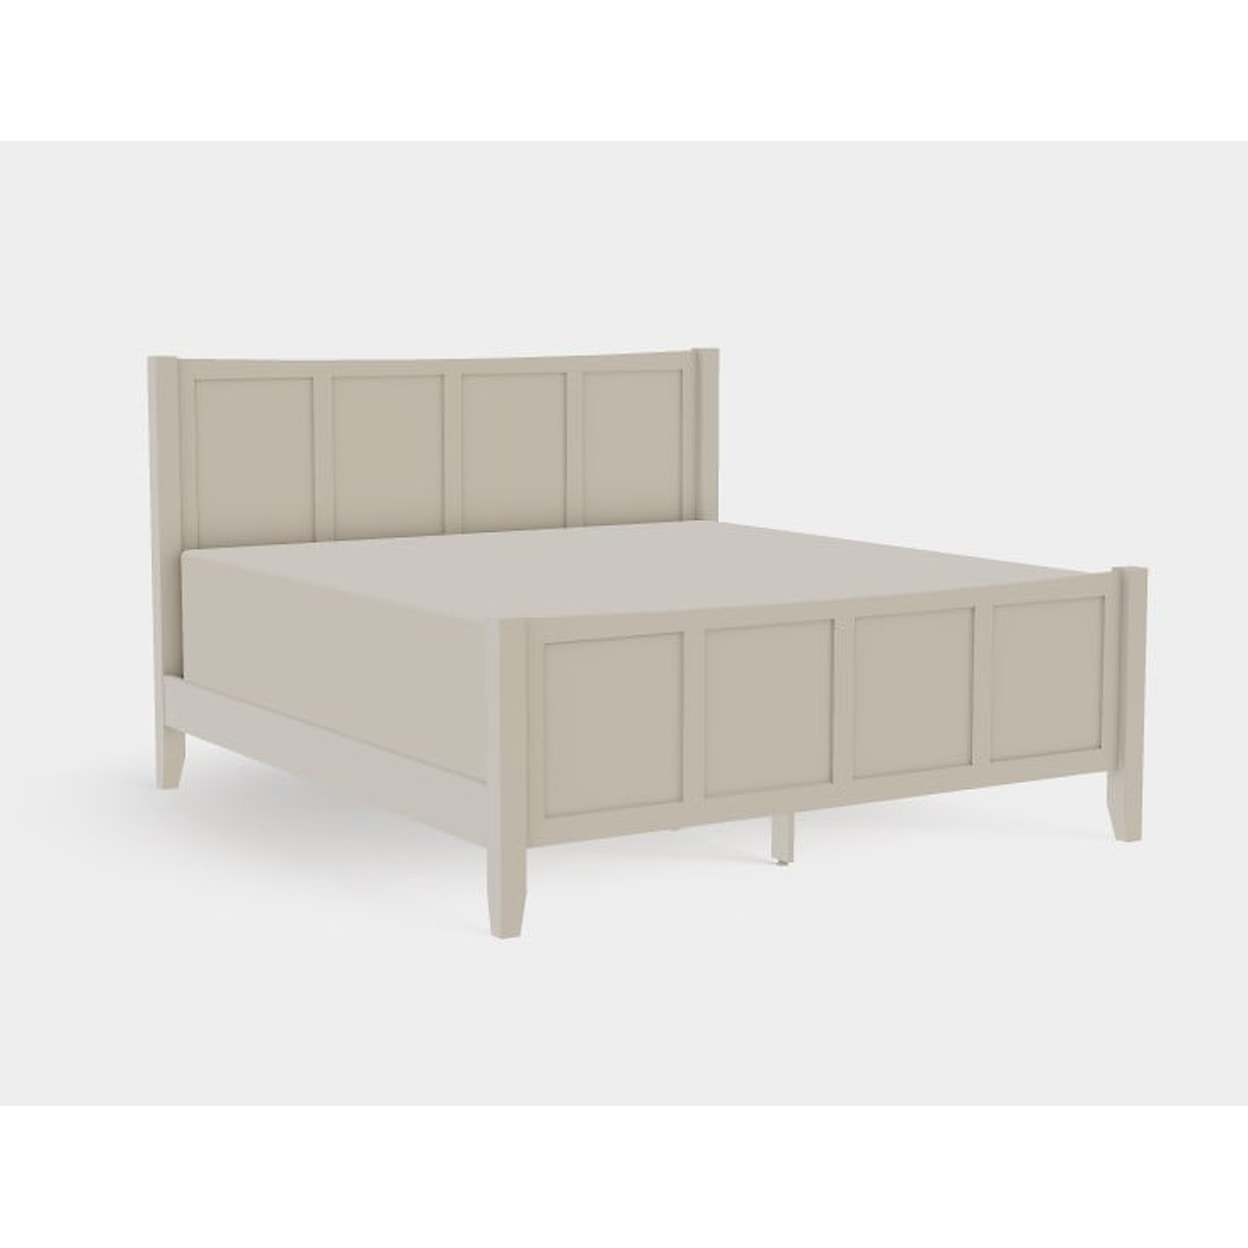 Mavin Atwood Group Atwood King High Footboard Panel Bed